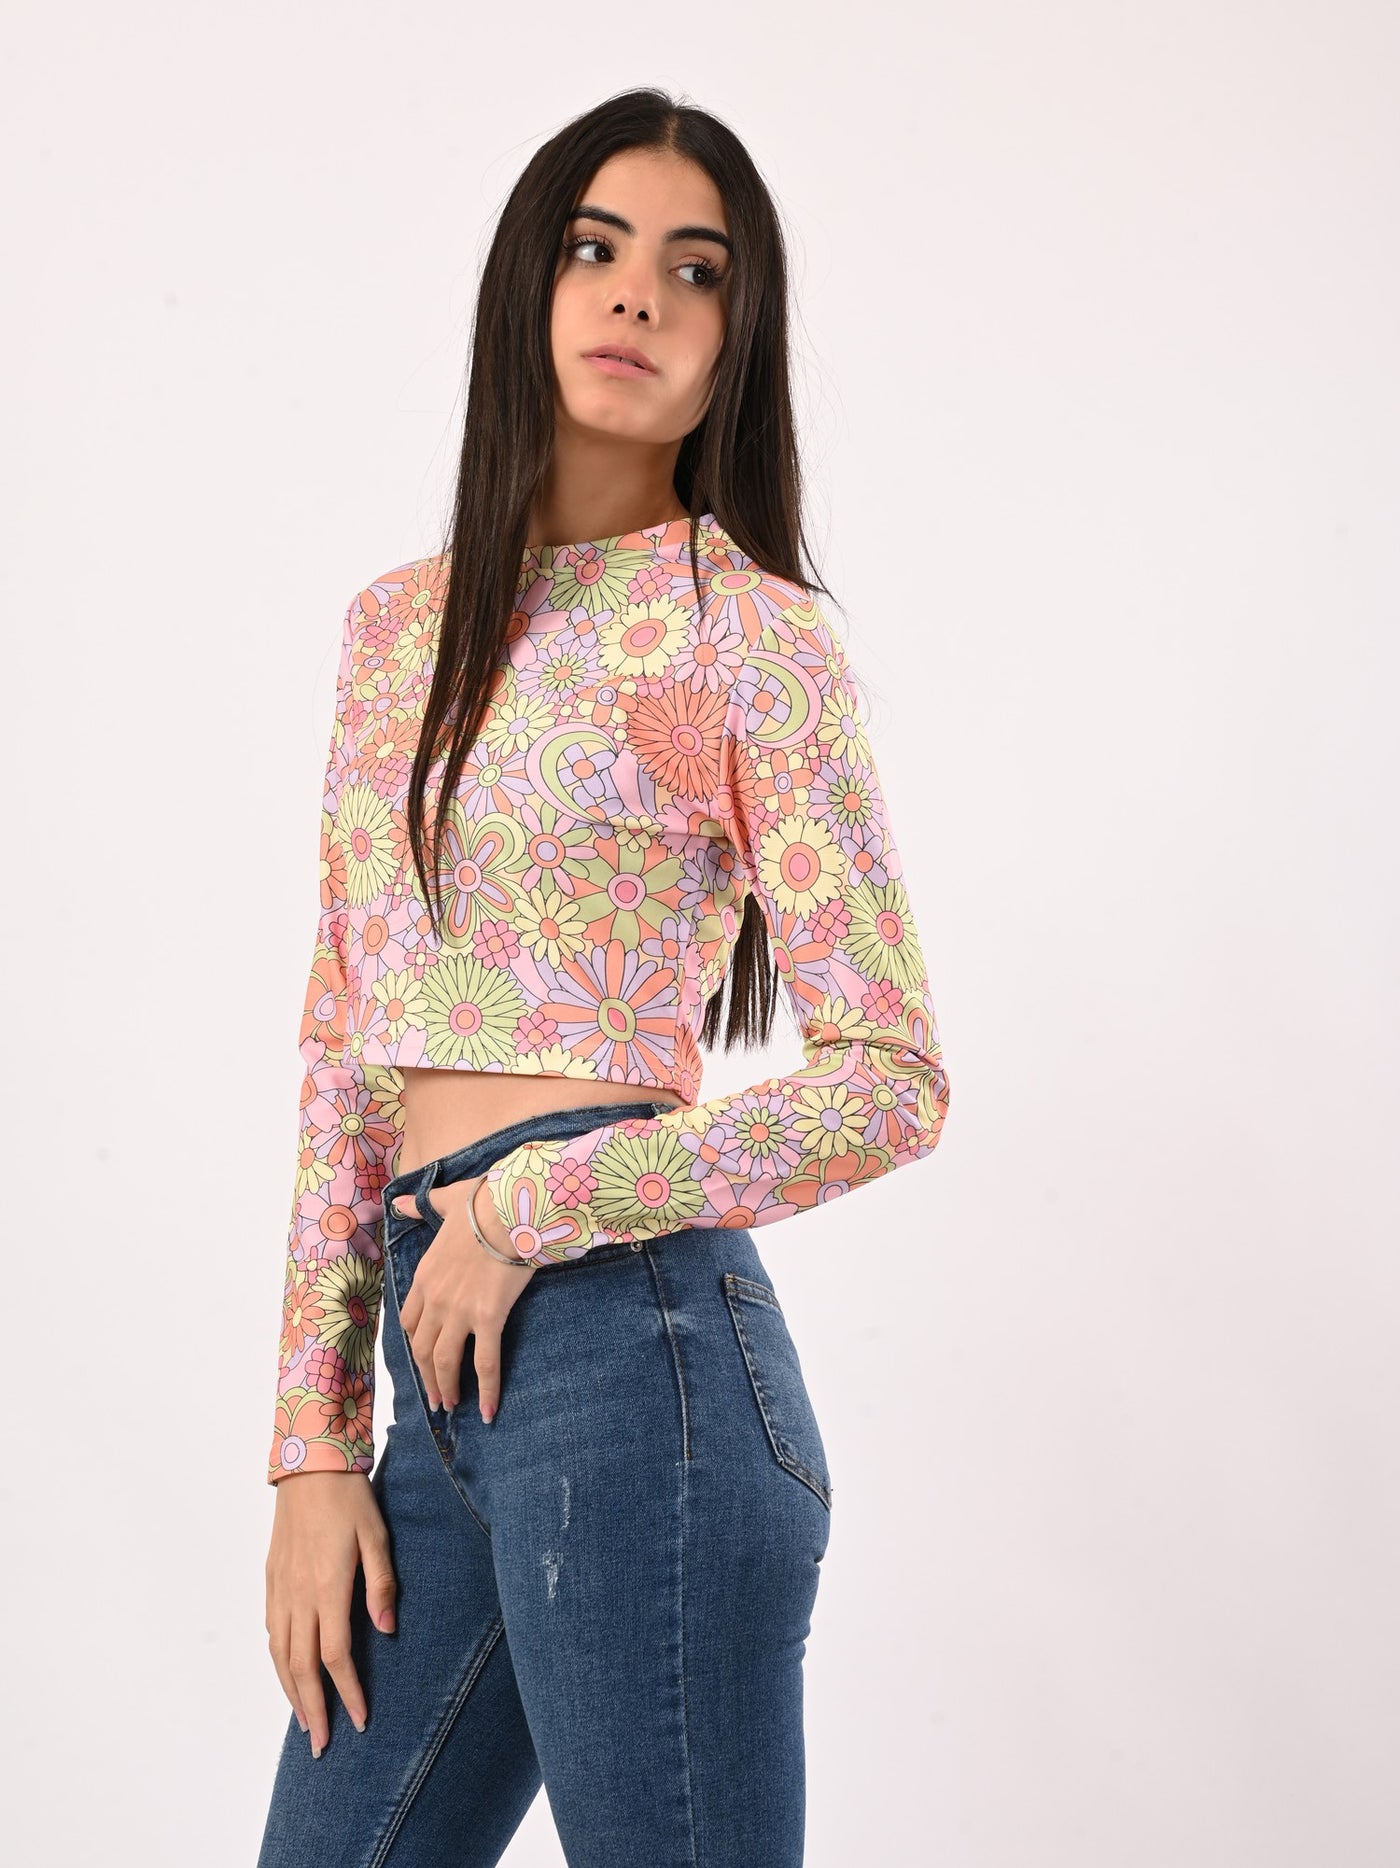 Top - Cropped - Floral